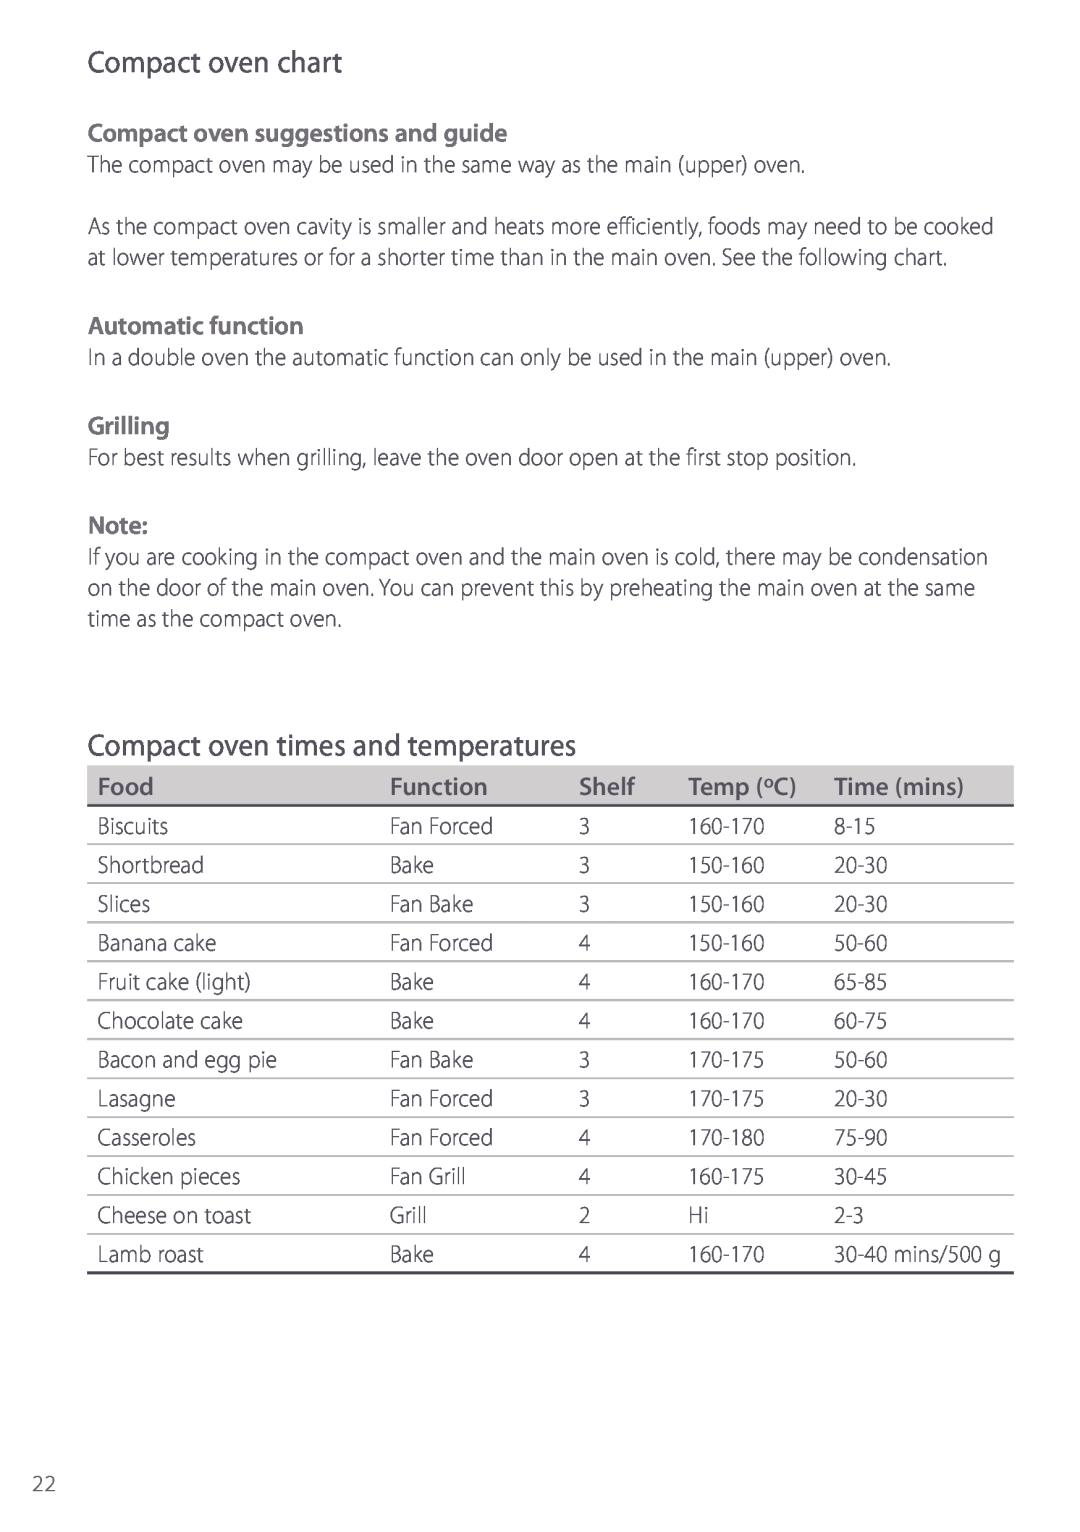 Fisher & Paykel BI452 Compact oven chart, Compact oven times and temperatures, Compact oven suggestions and guide, Food 